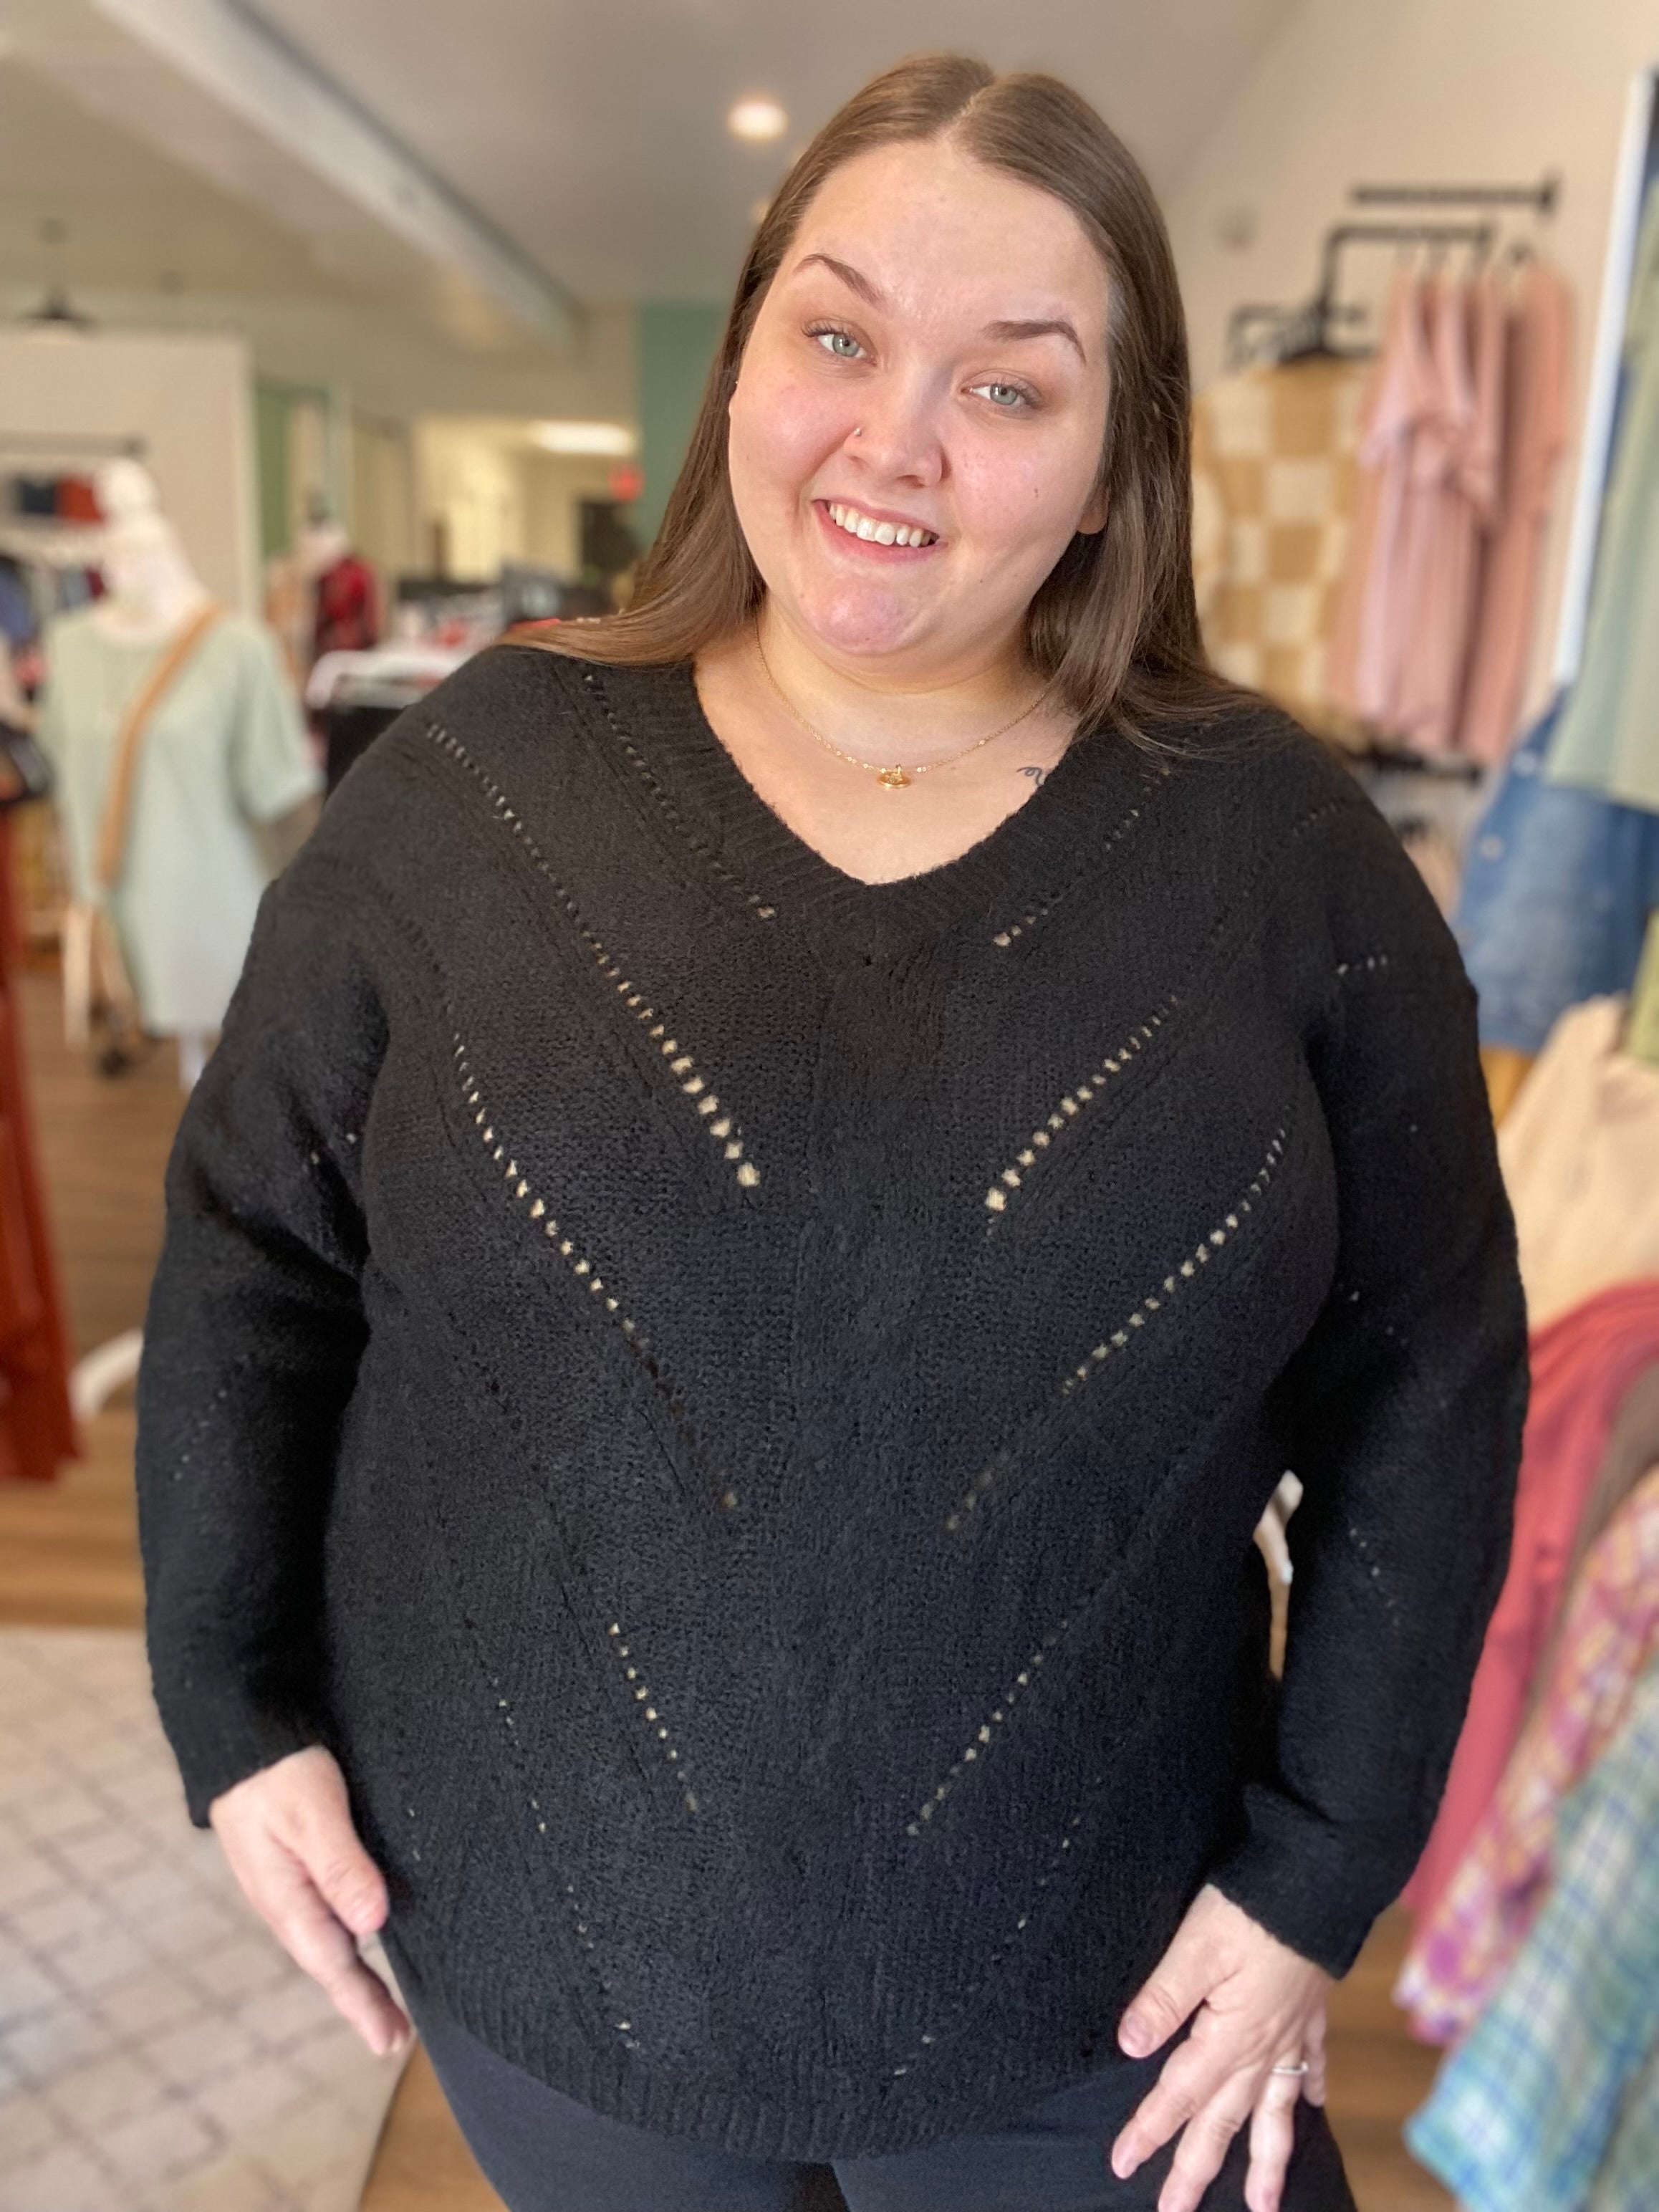 Shop Kendra V-Neck Open Dot Sweater - Black-Sweater at Ruby Joy Boutique, a Women's Clothing Store in Pickerington, Ohio